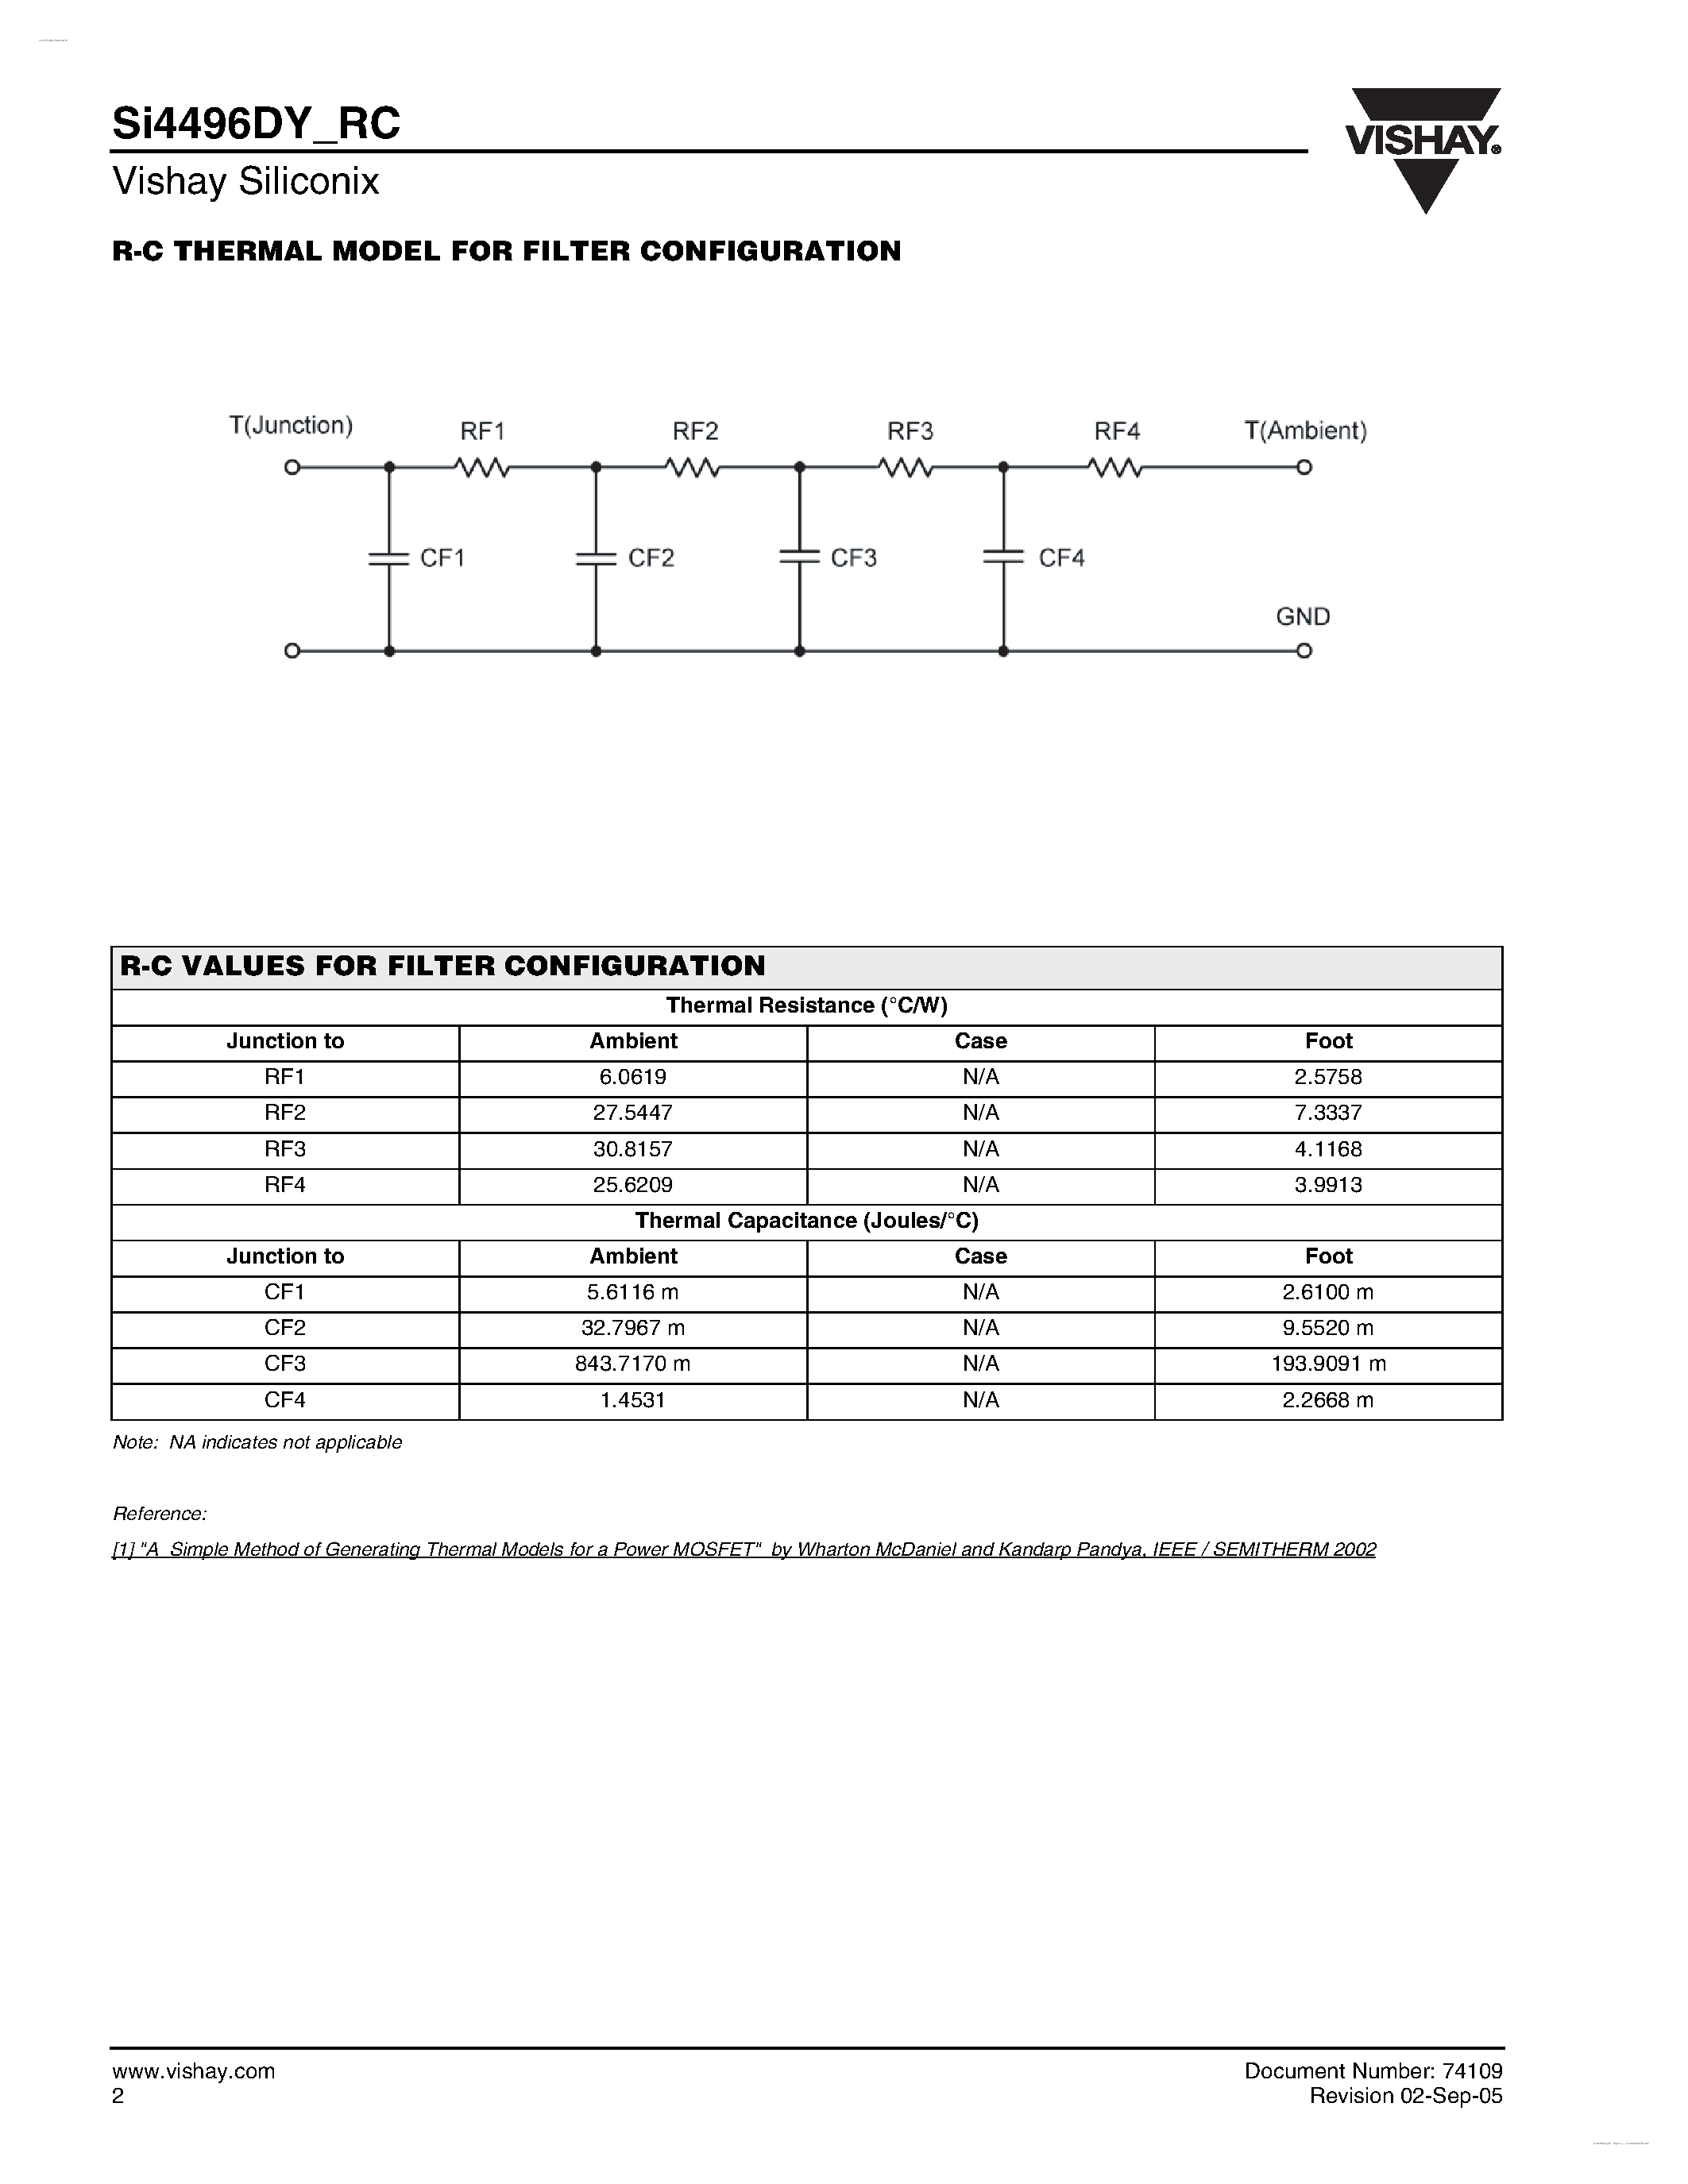 Datasheet SI4496DY - R - C Thermal Model Parameters page 2